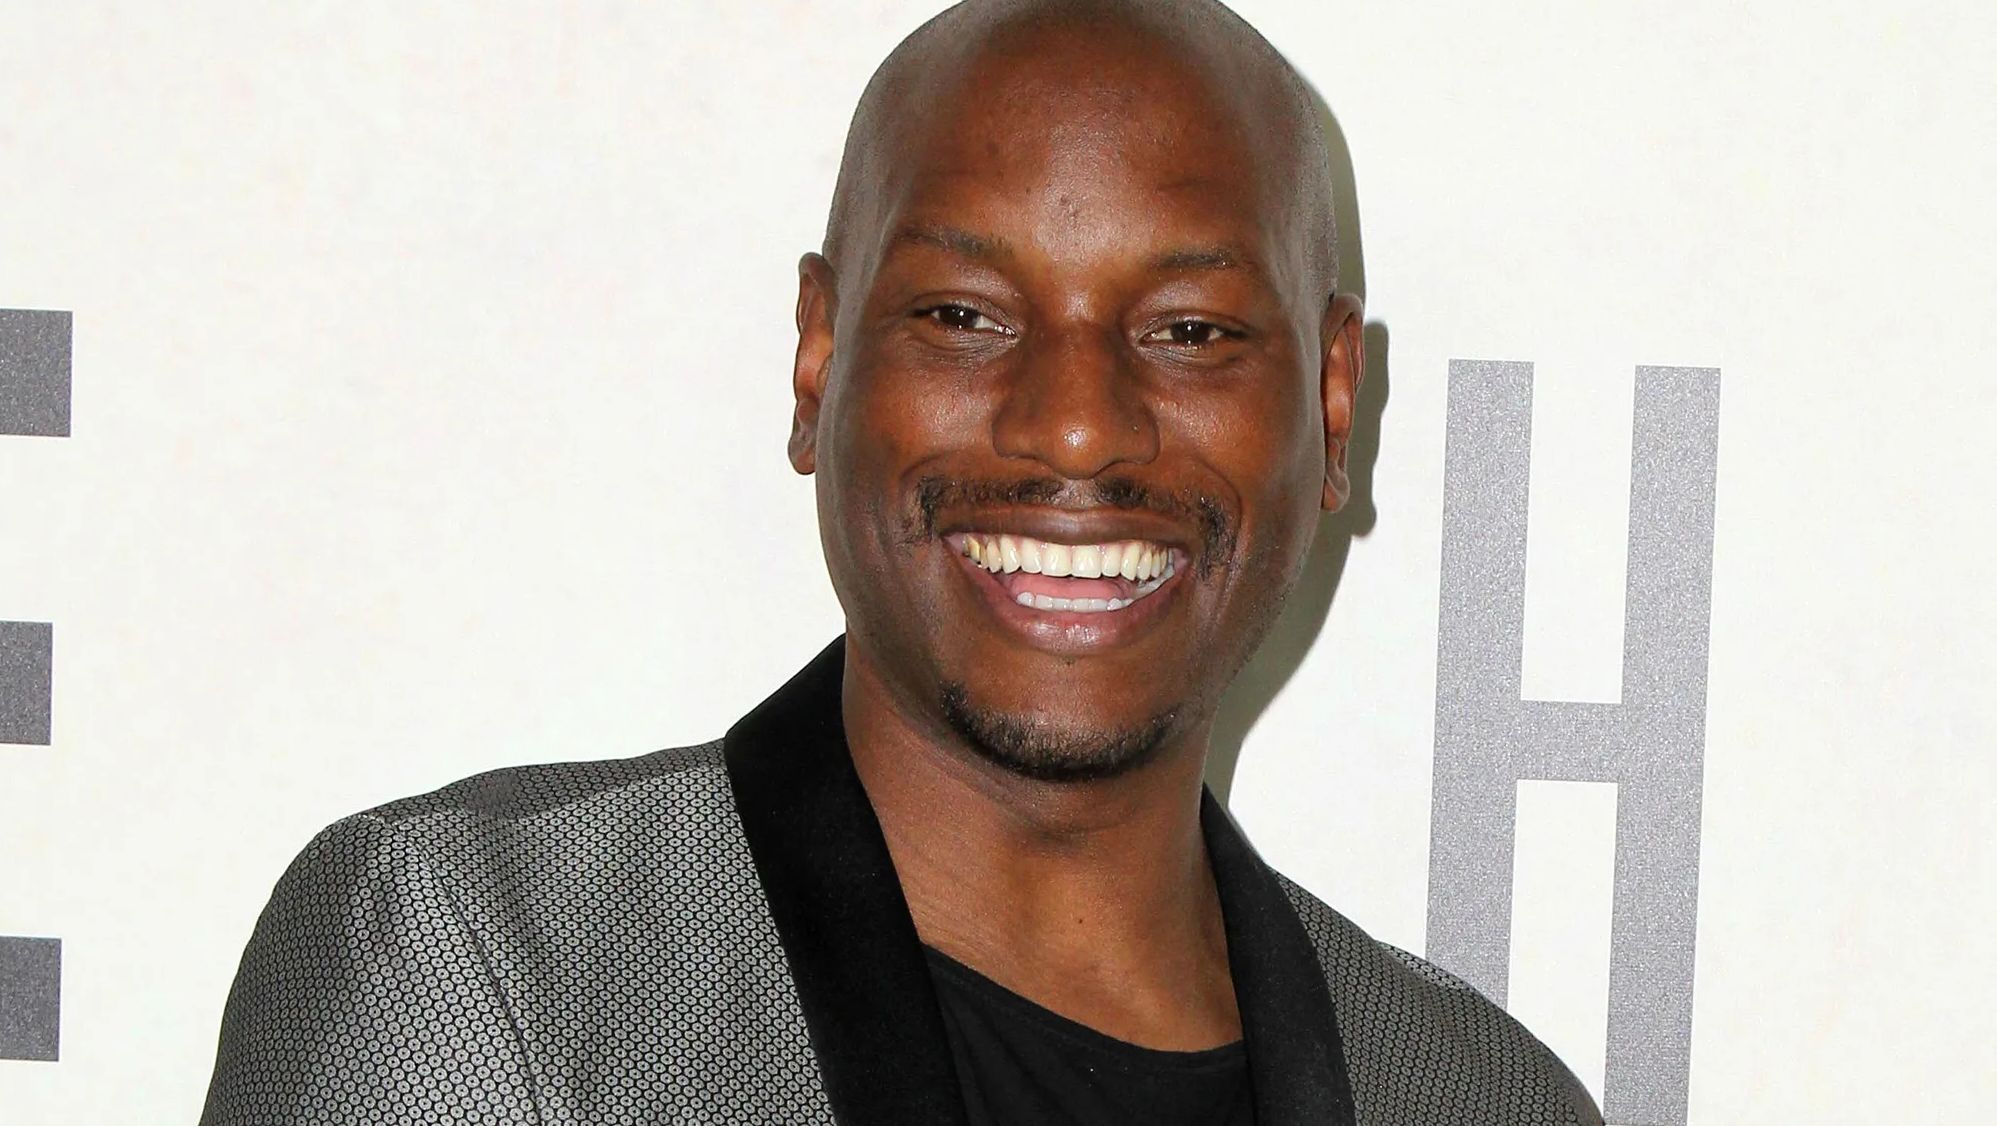 Tyrese Gibson smiles at an event.